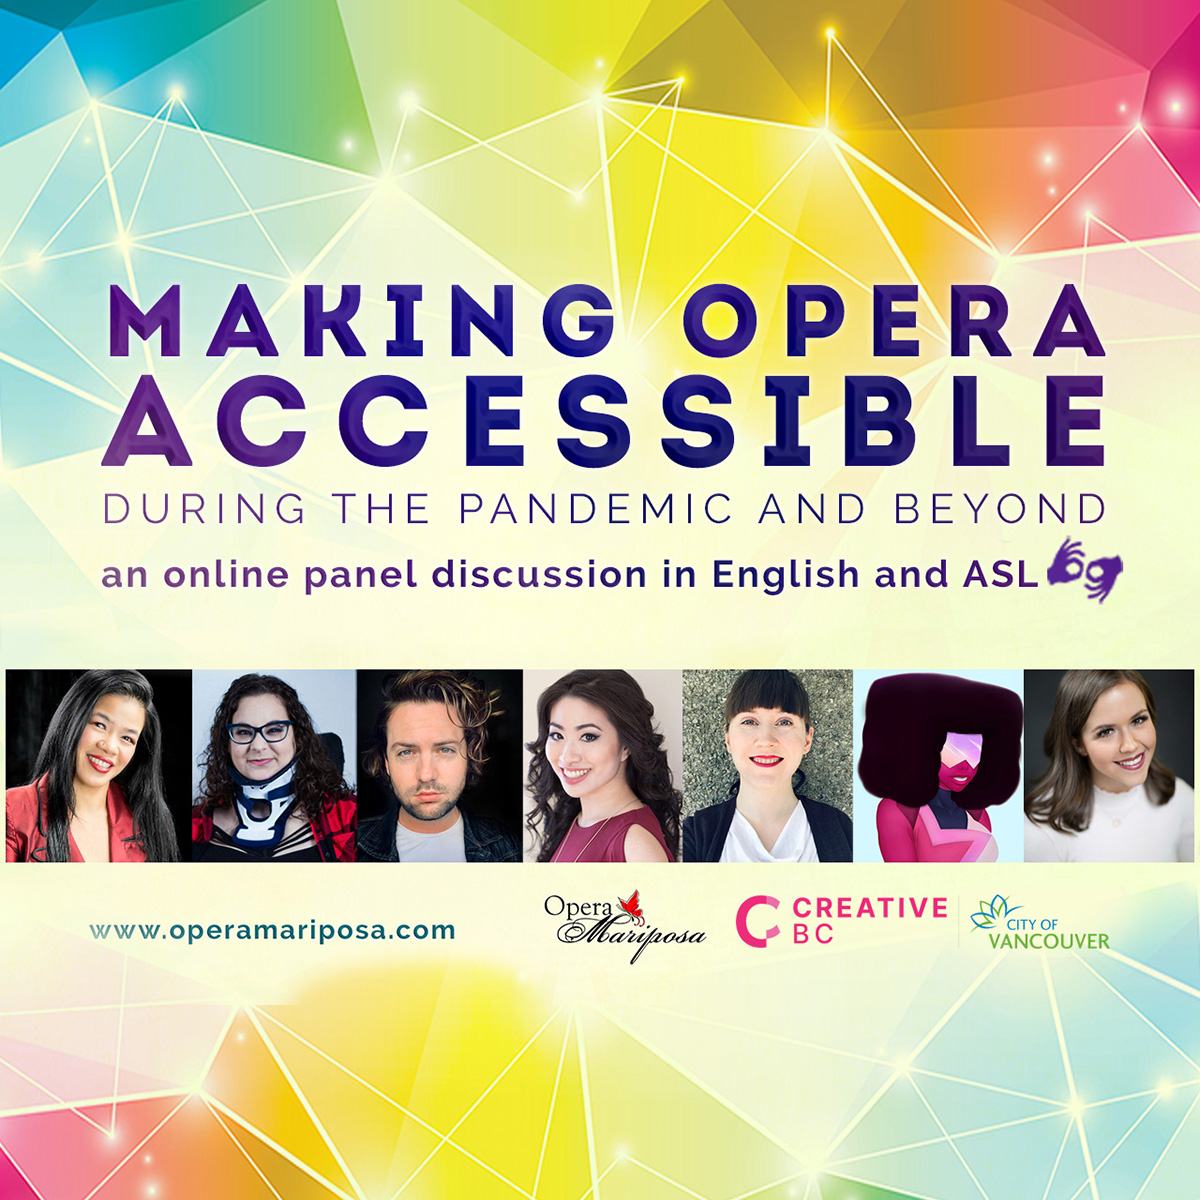 A rainbow graphic includes seven headshots depicting individuals of an array of races, gender presentations and body types. Text reads, Making Opera Accessible during the pandemic and beyond: an online panel in English and ASL. www.operamariposa.com. In the corner are text-based logos for Opera Mariposa, Creative BC and the City of Vancouver..